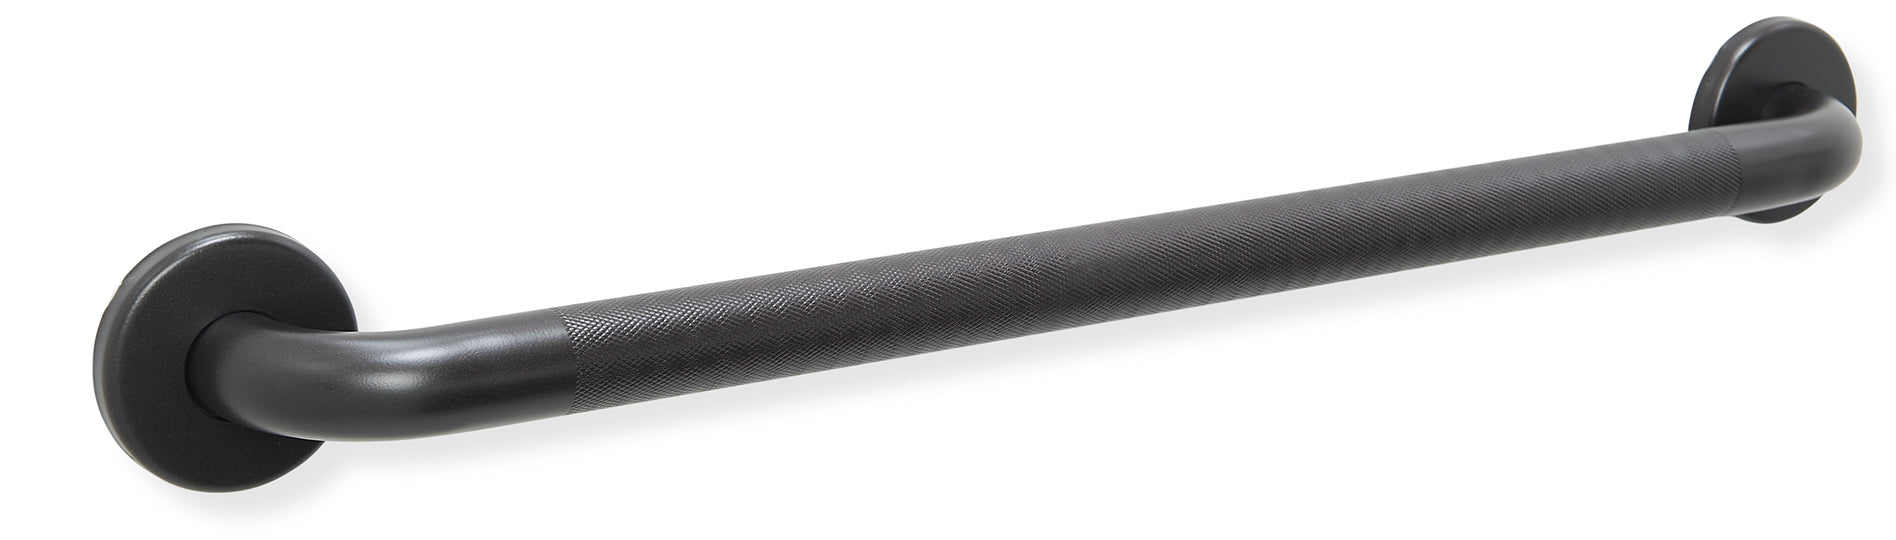 matte black grab bar with knurled non slip grip for Ontario building code installations